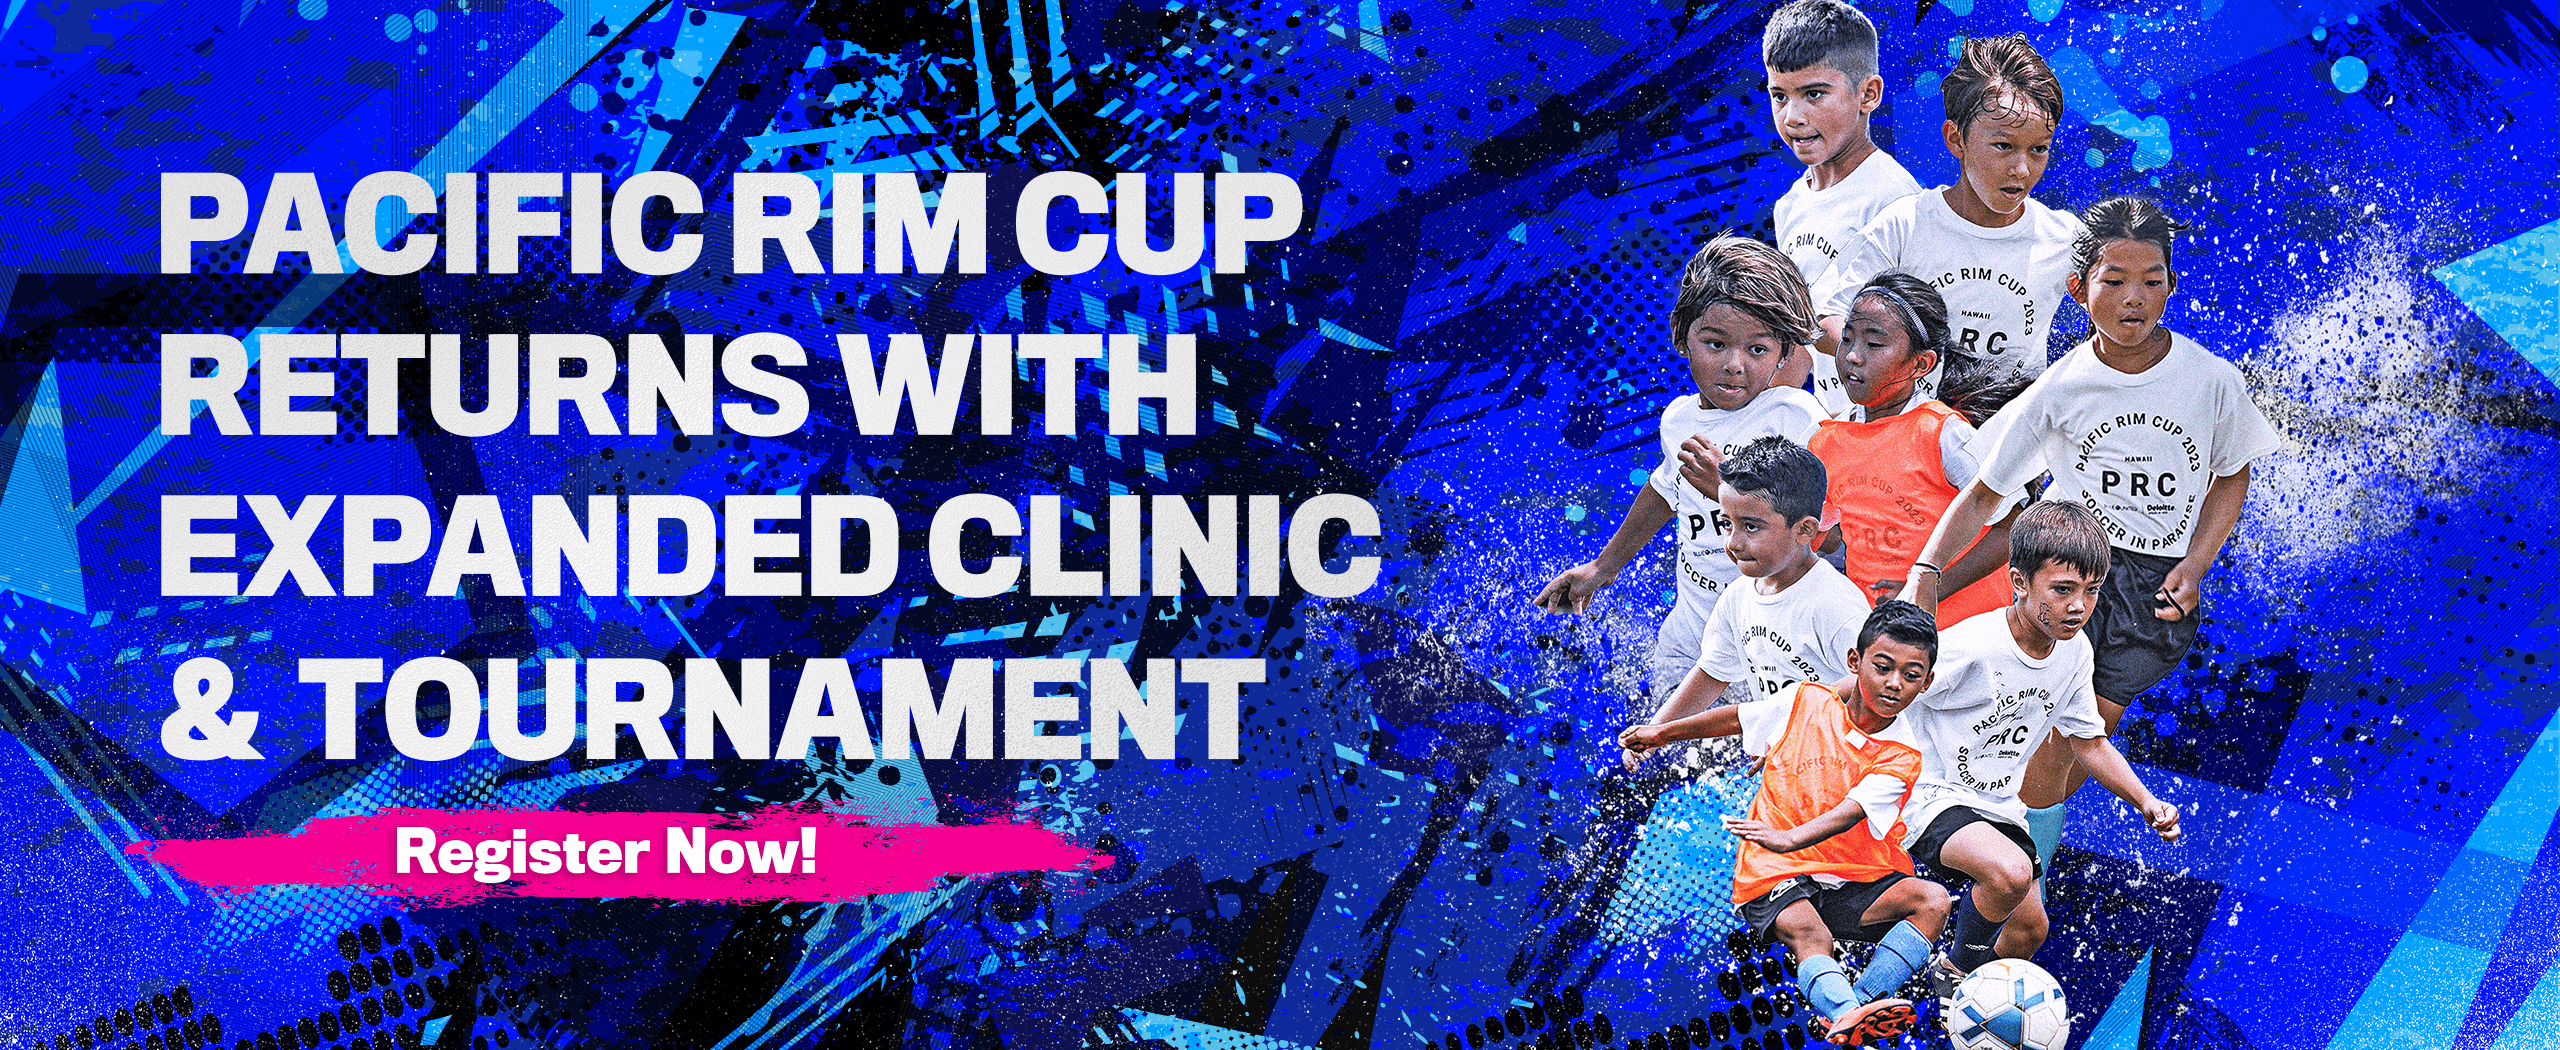 PACIFIC RIM CUP RETURNS WITH EXPANDED CLINIC & TOURNAMENT Register Now!